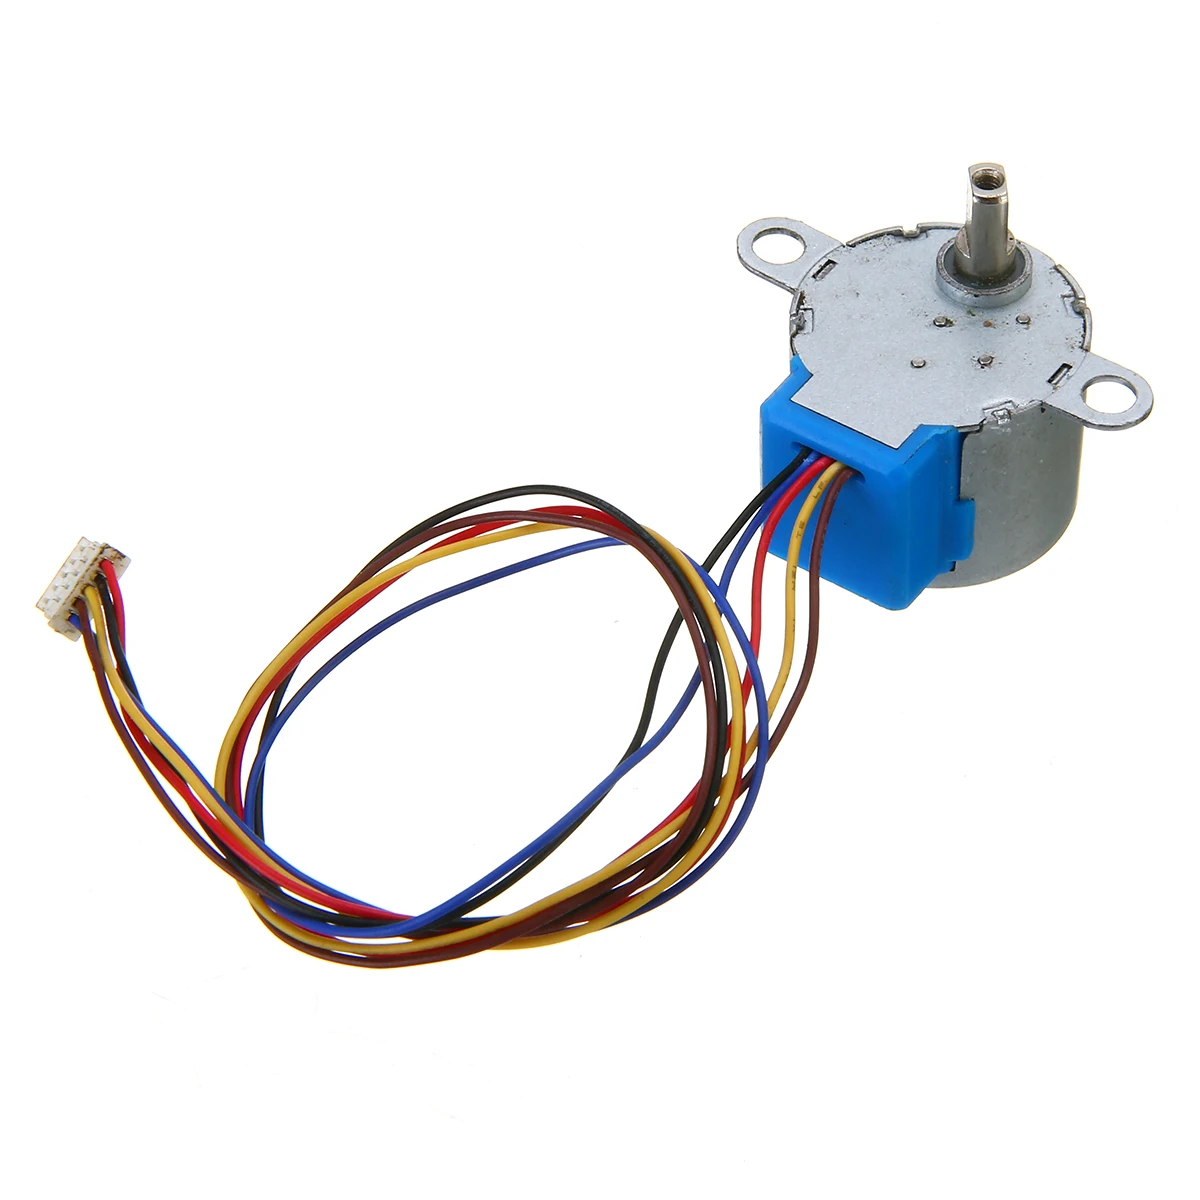 New 24BYJ48 DC5V Gear Stepper Motor 4-Phase 5-Wire Micro Reduction Step Motor For Arduino DIY Kit High Quality